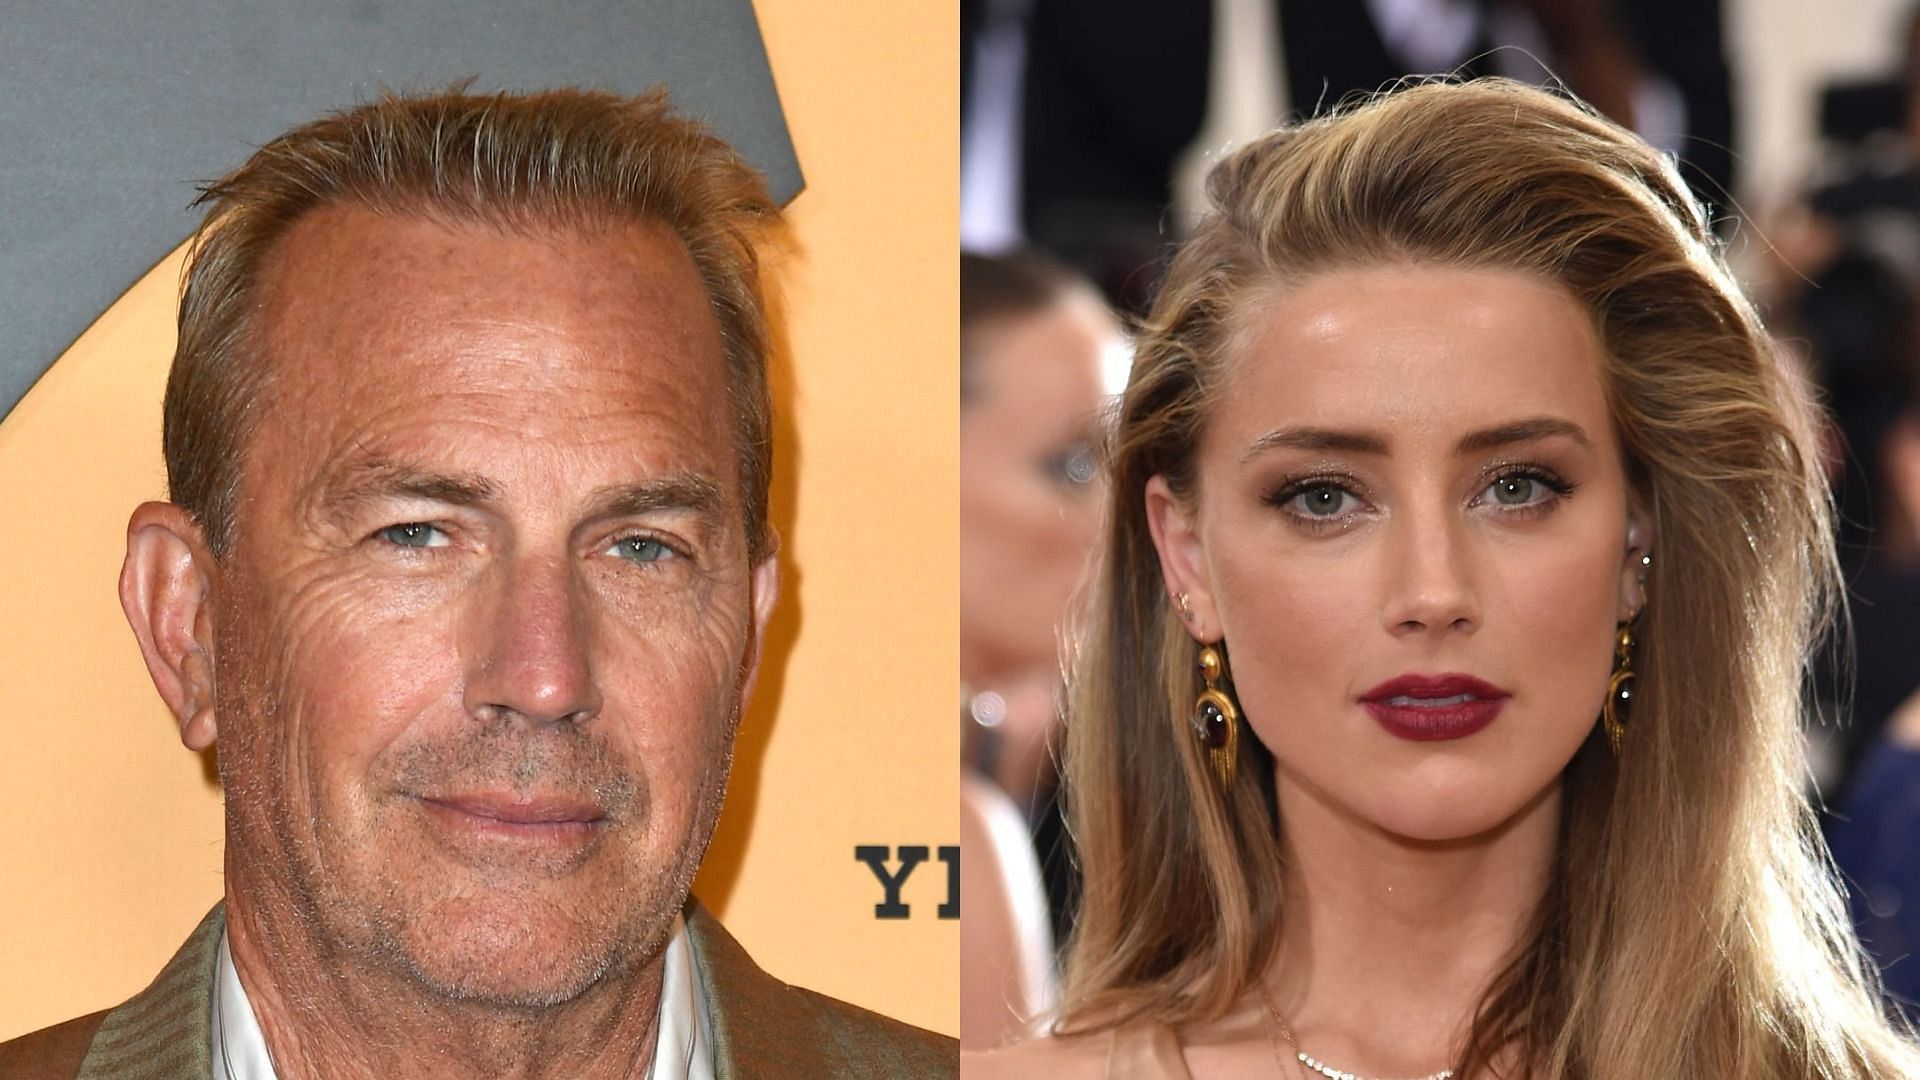 Kevin Costner alleged past comments on Amber Heard resurfaced online (Image via Getty Images)